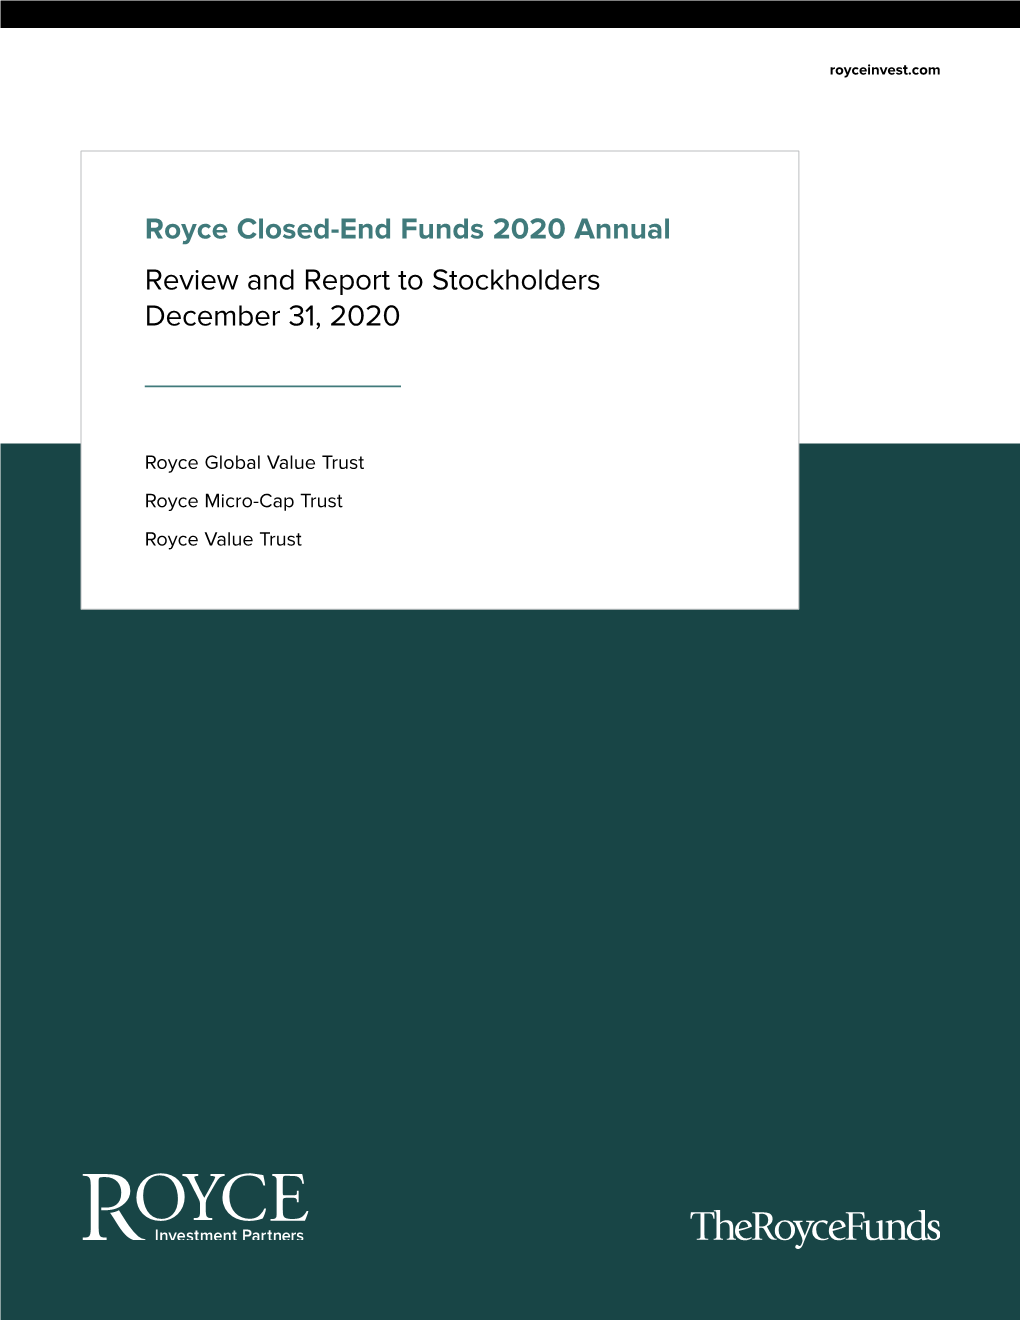 Royce Closed-End Funds 2020 Annual Review and Report to Stockholders December 31, 2020